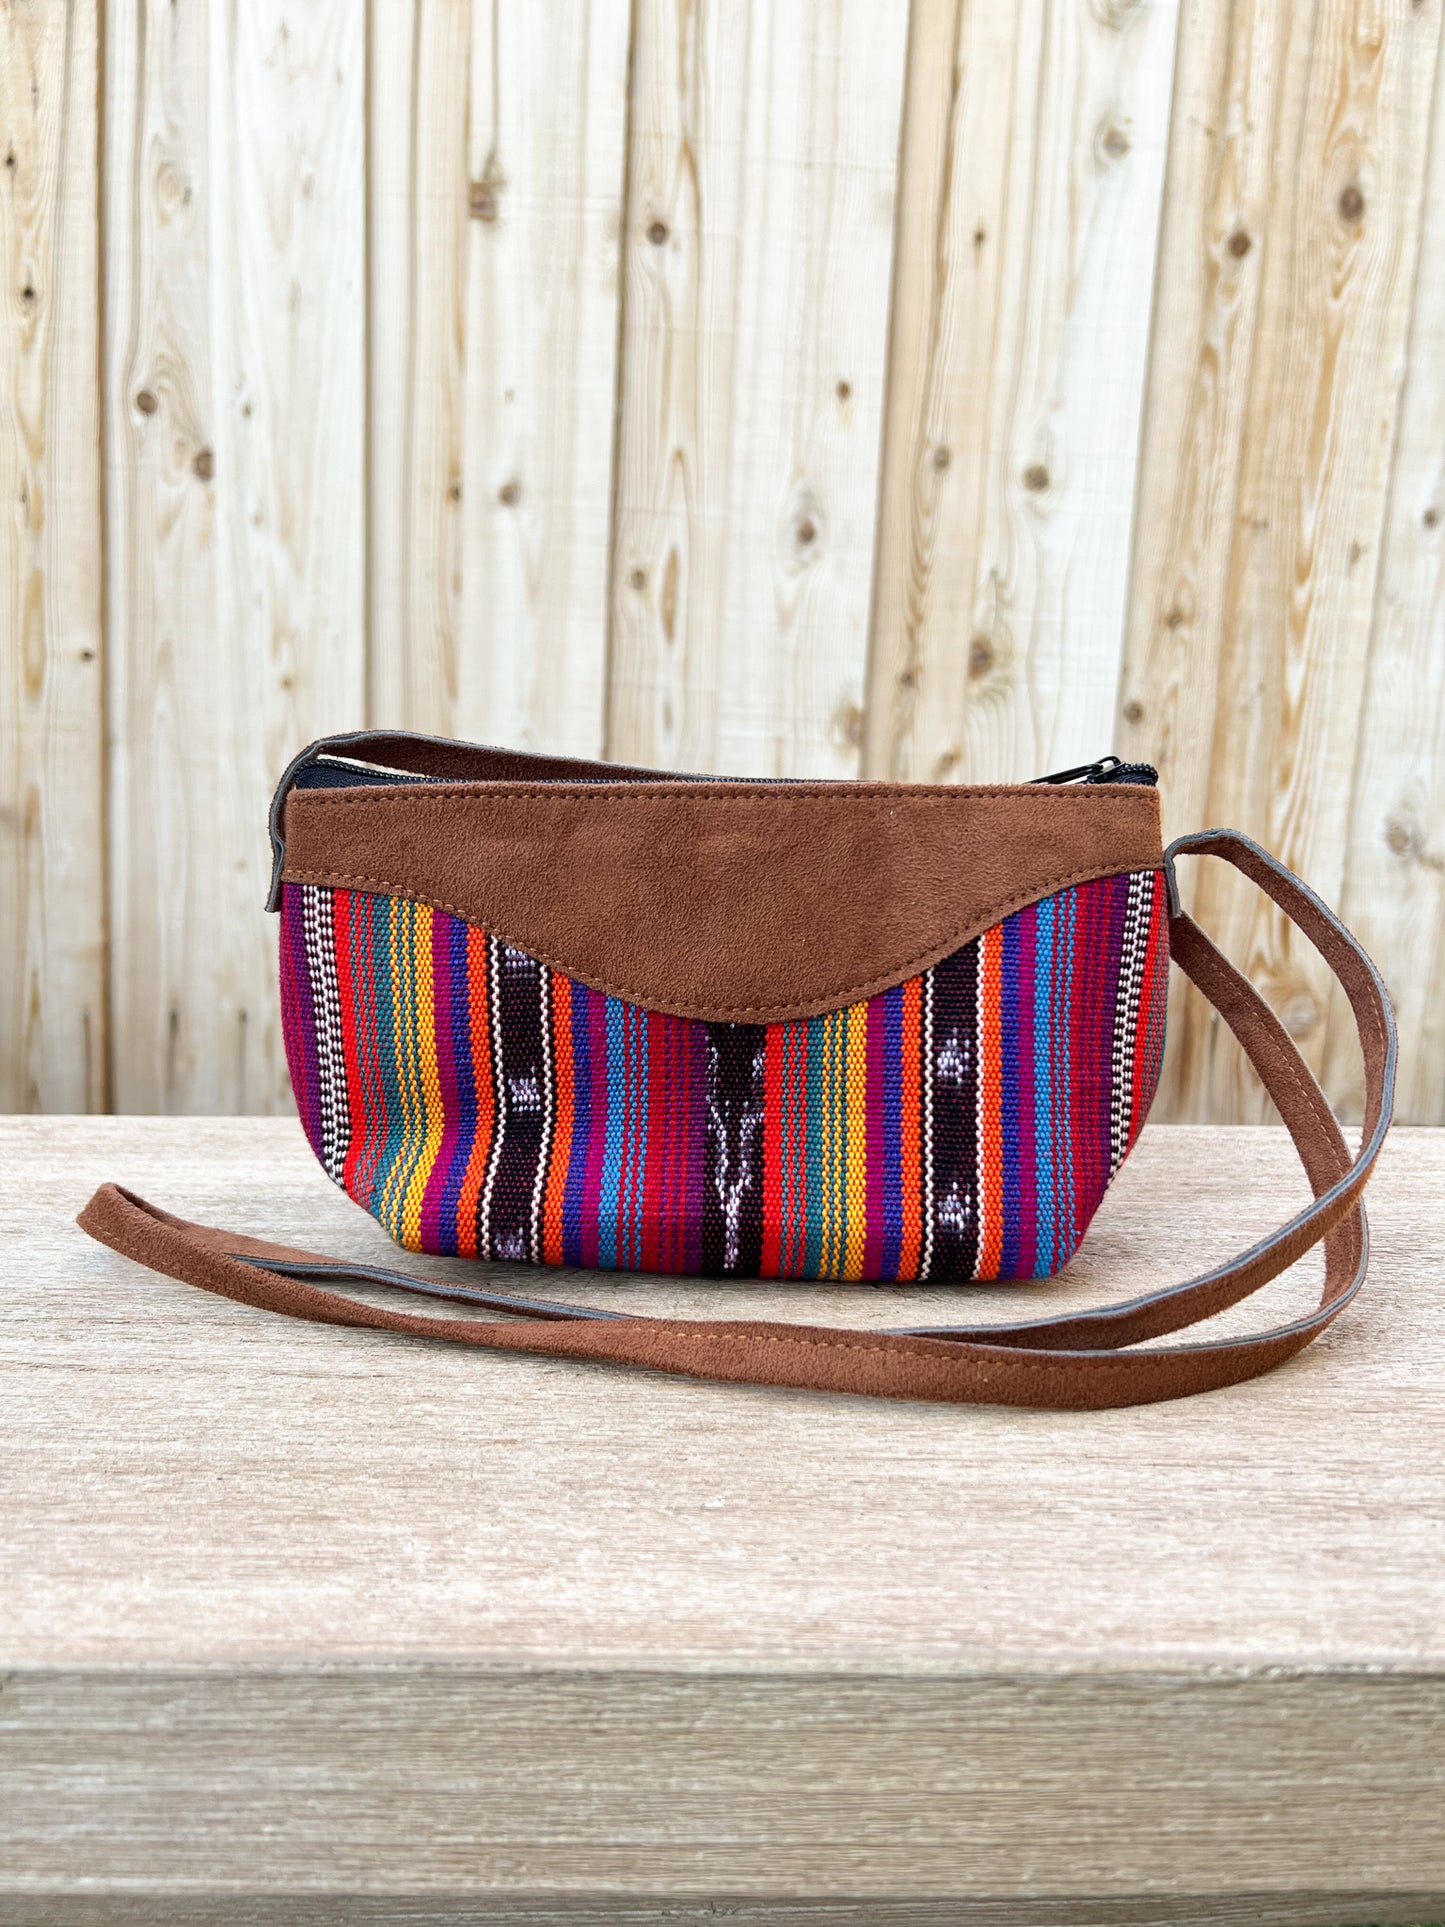 Our "Quetzal Crossbody Bags" are handmade in Guatemala. It's vibrant and colorful textiles make them a perfect and unique standout piece. A perfect size for your essentials only. Handwoven Intricate Fabric. Faux Suede Straps. Zipper Closure. Fully Lined. Handmade in Guatemala